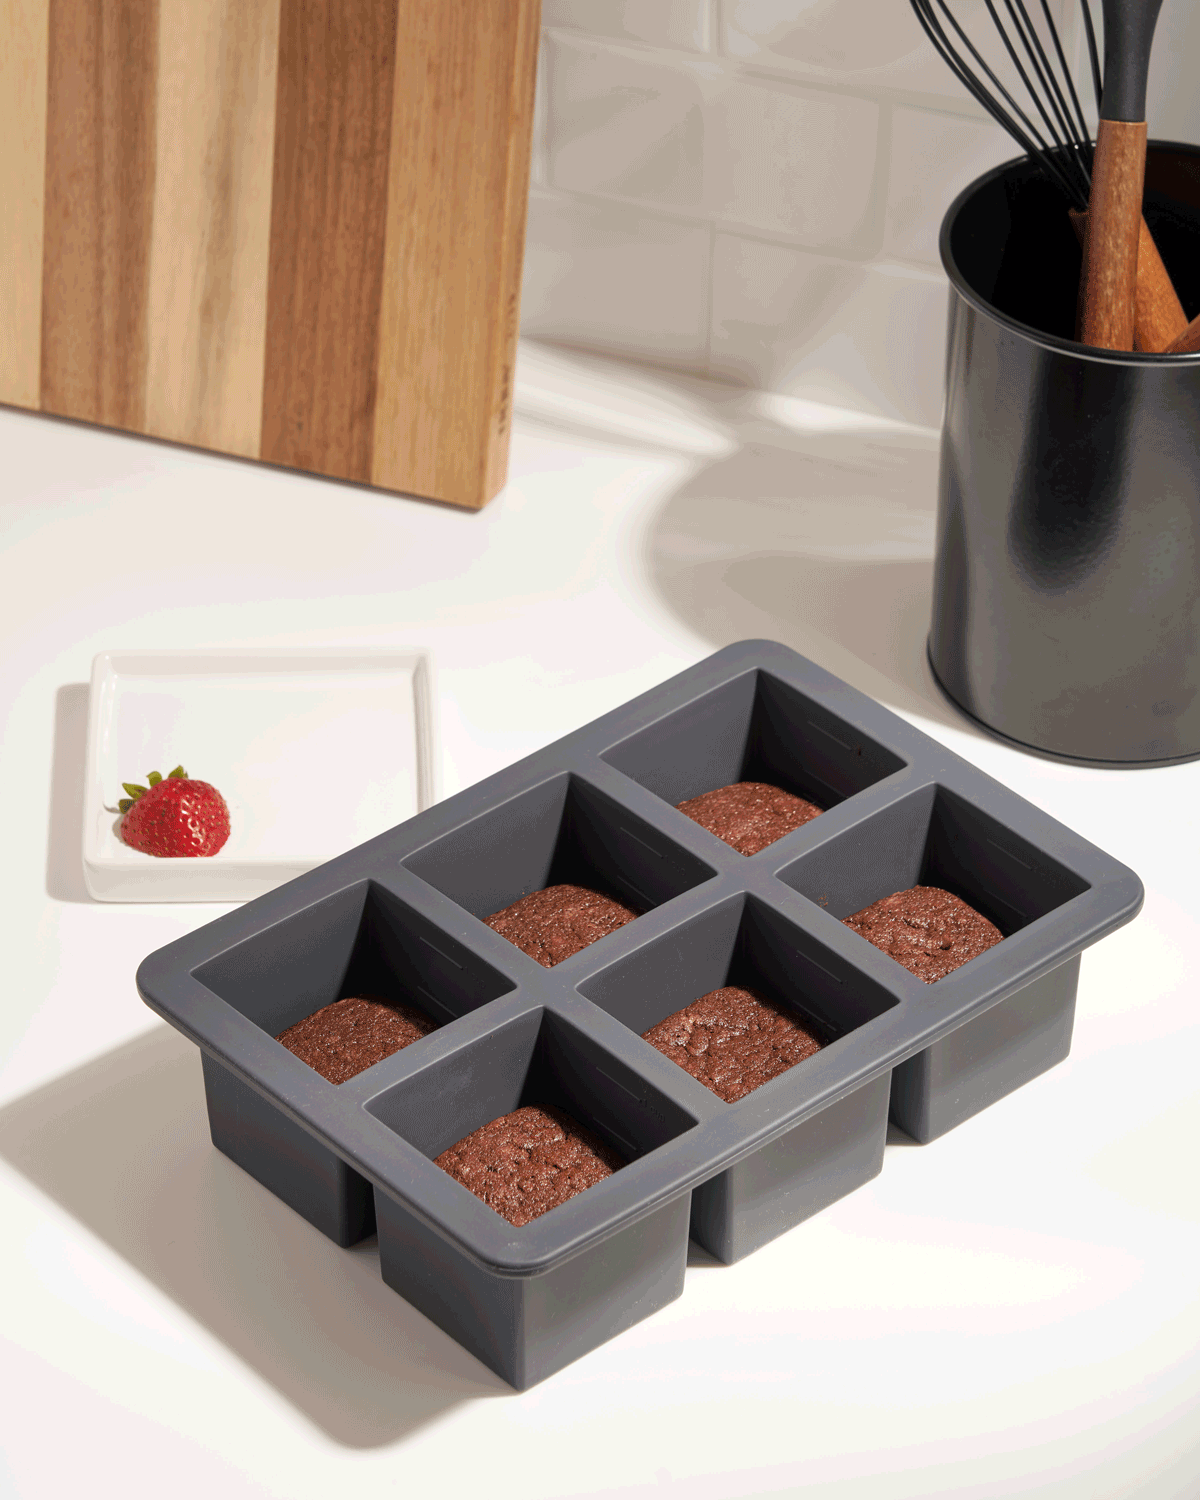 Charcoal 6 Cubes | Each cube holds 1 cup (8 oz)